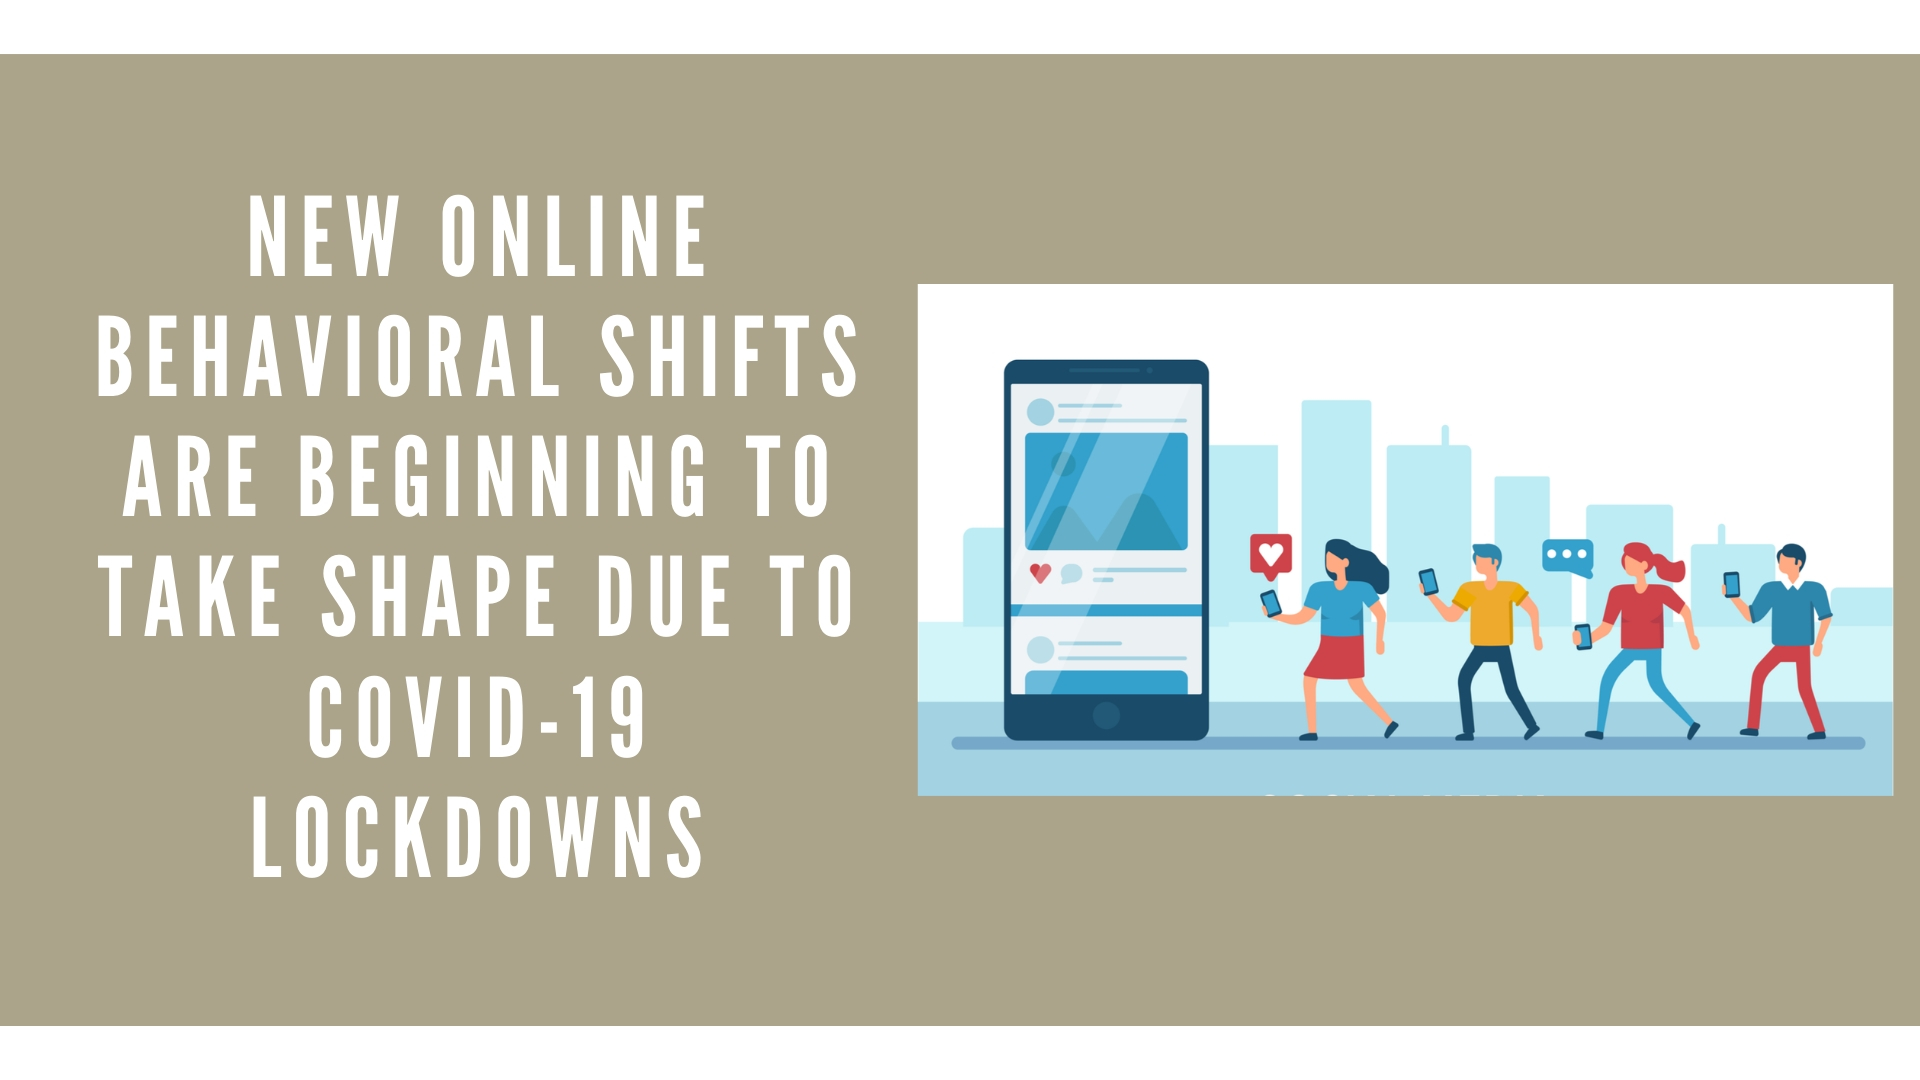 New Online Behavioral Shifts Are Beginning to Take Shape Due to COVID-19 Lockdowns